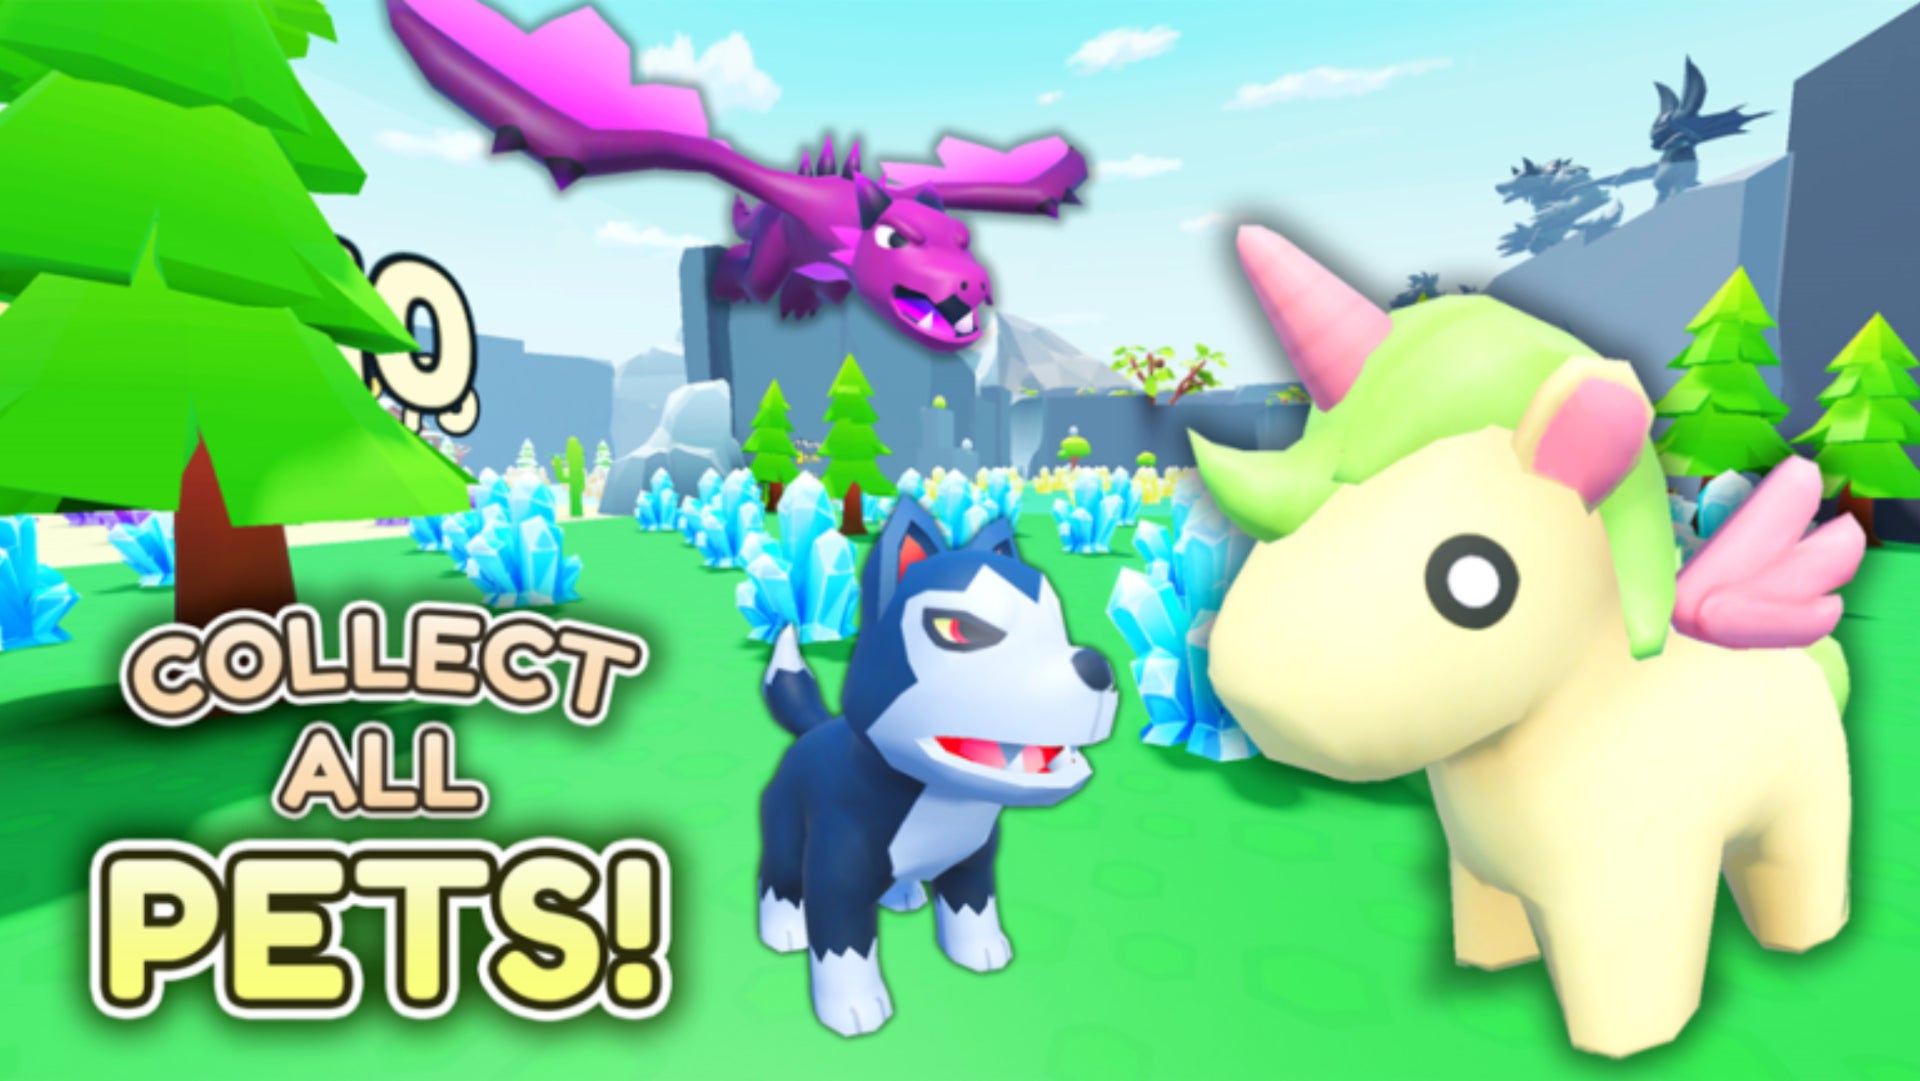 Roblox Collect All Pets, official TwoZoos game artwork featuring a  Husky, a Wyvern and a Unicorn